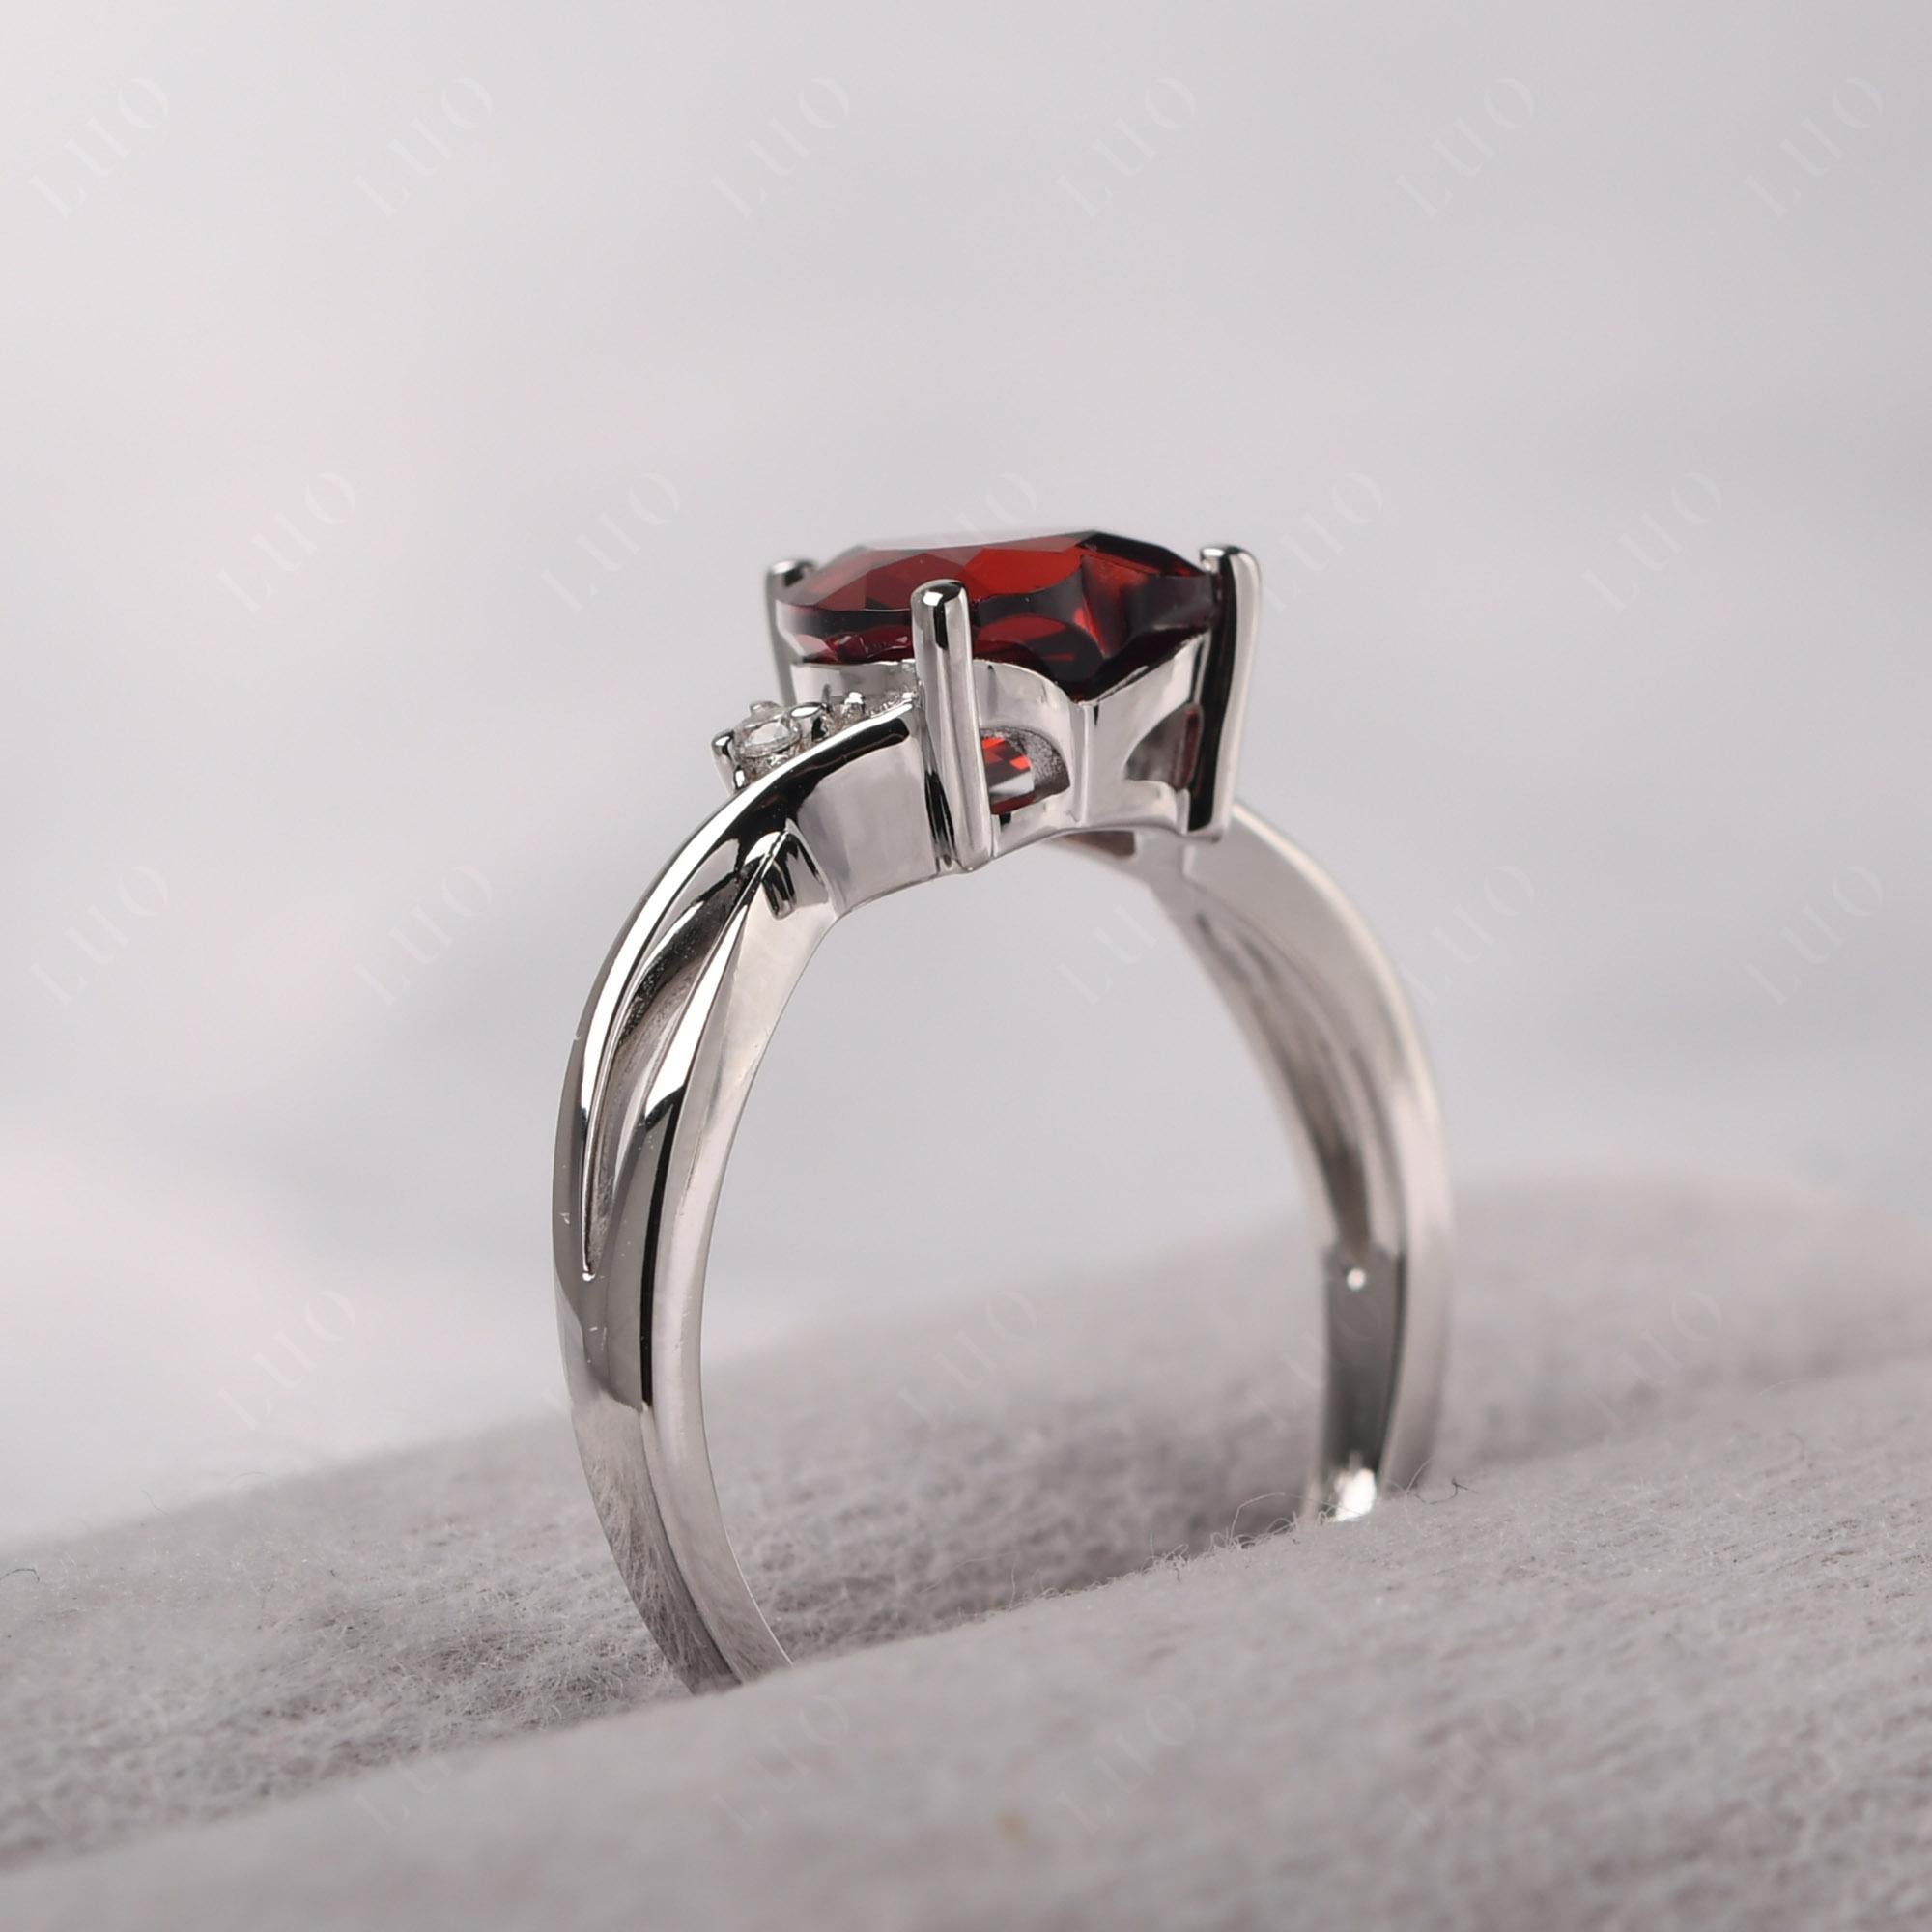 Heart Cut Garnet Engagement Ring - LUO Jewelry